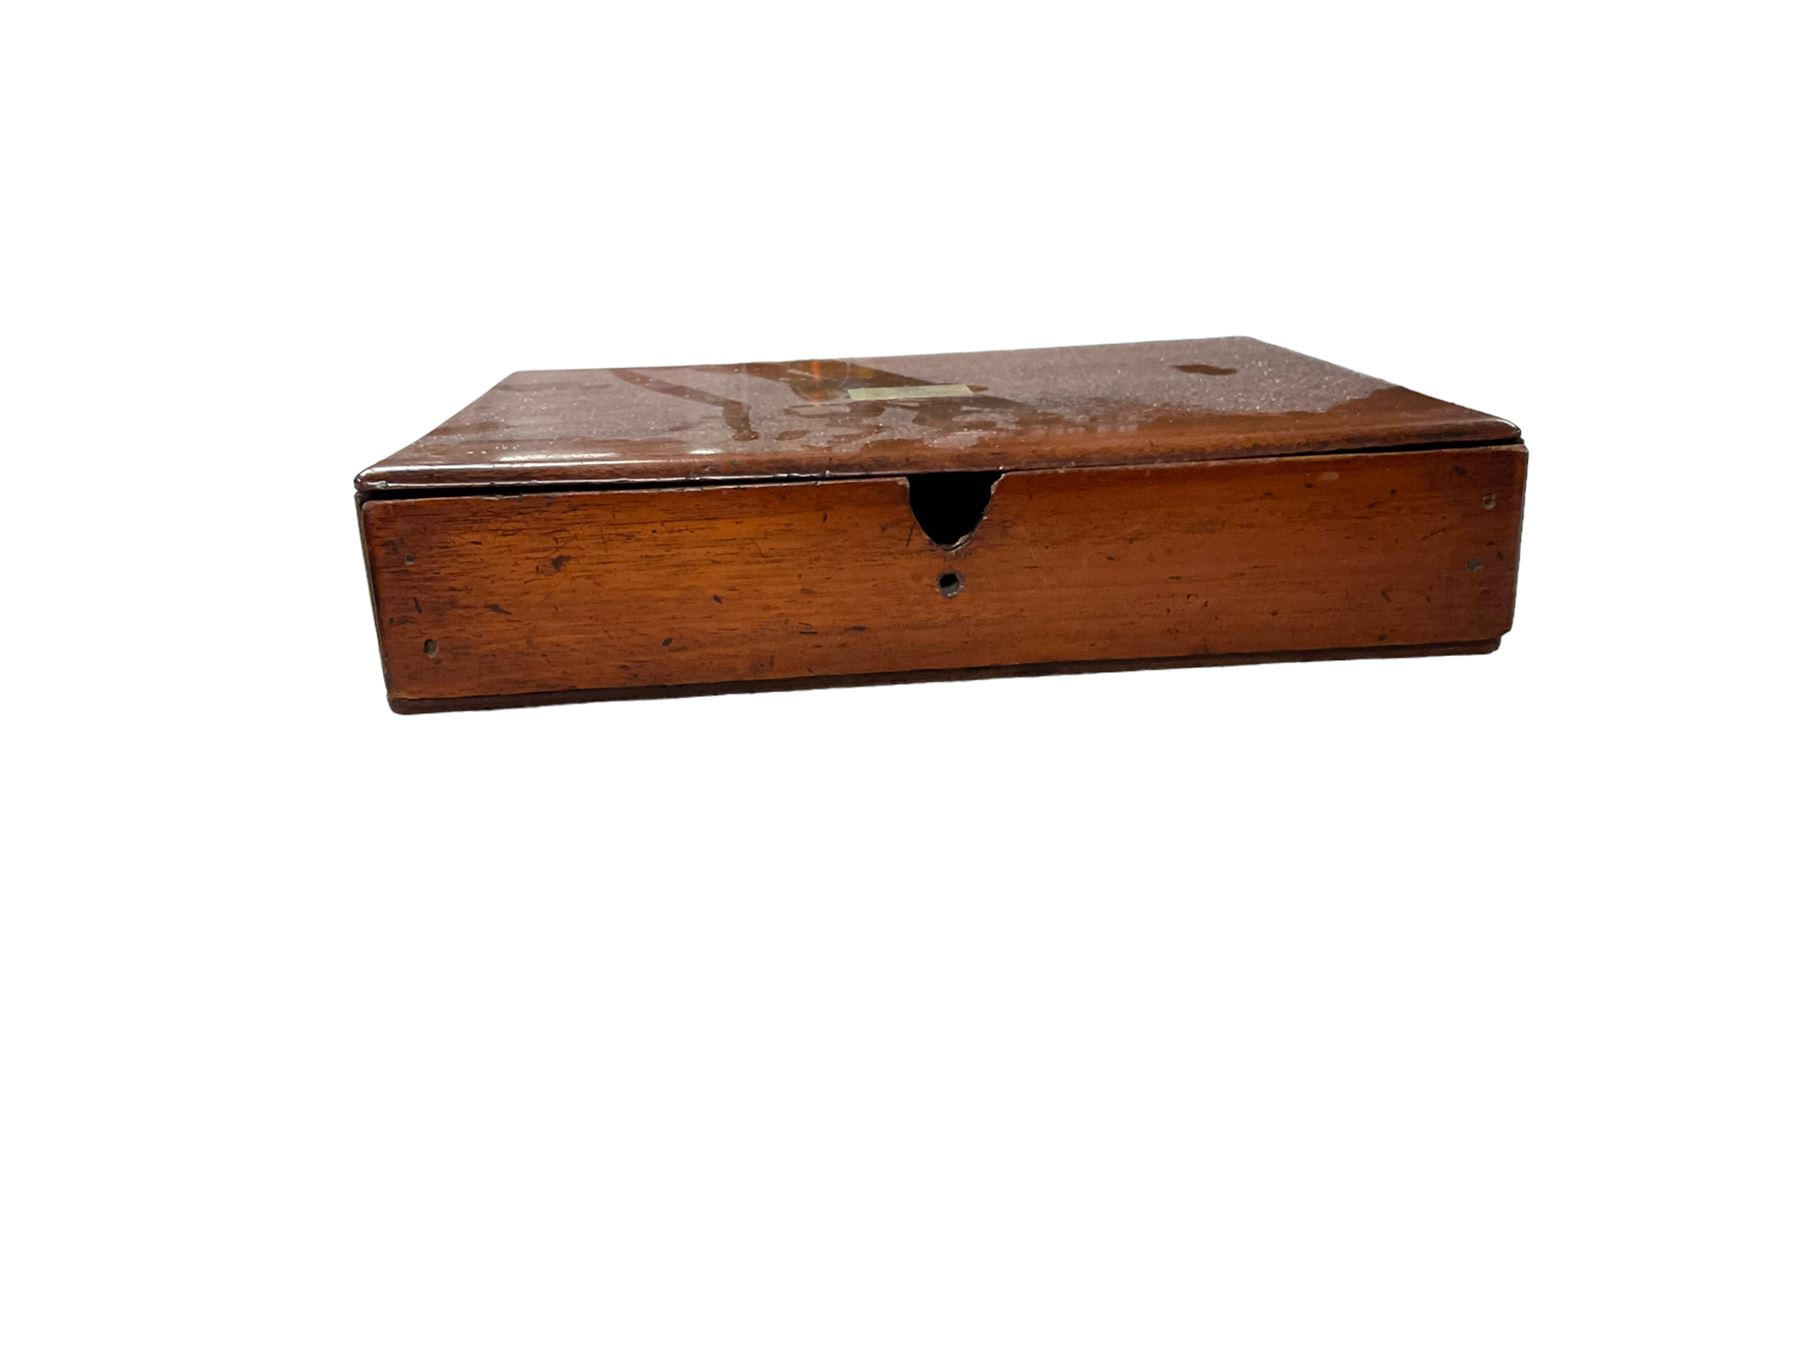 Small mahogany box with pull out draw - Image 2 of 3